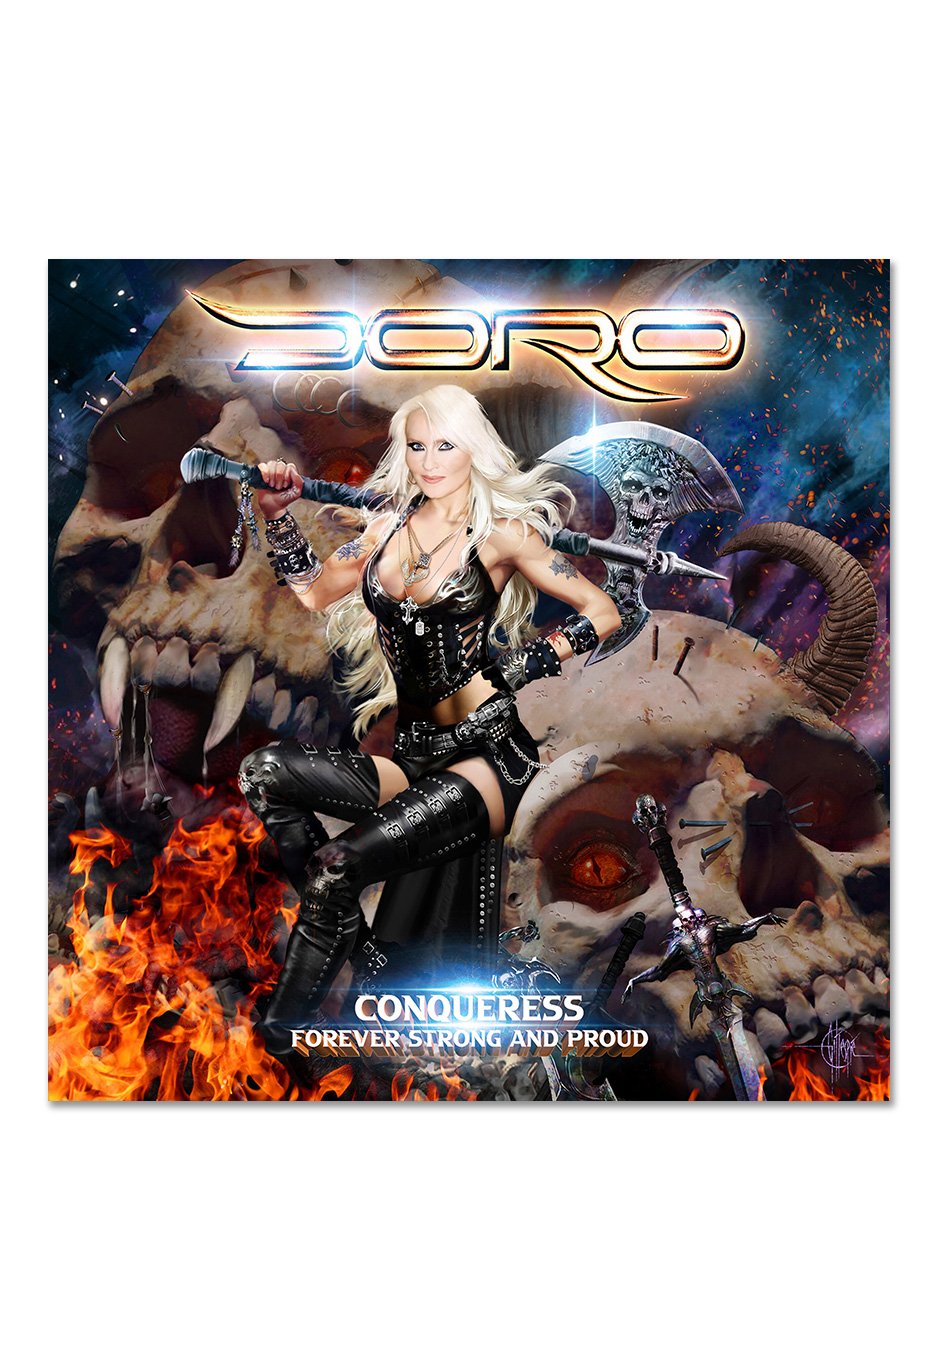 Doro - Conqueress - Forever Strong And Proud Ltd. Purple - Colored 2 Vinyl